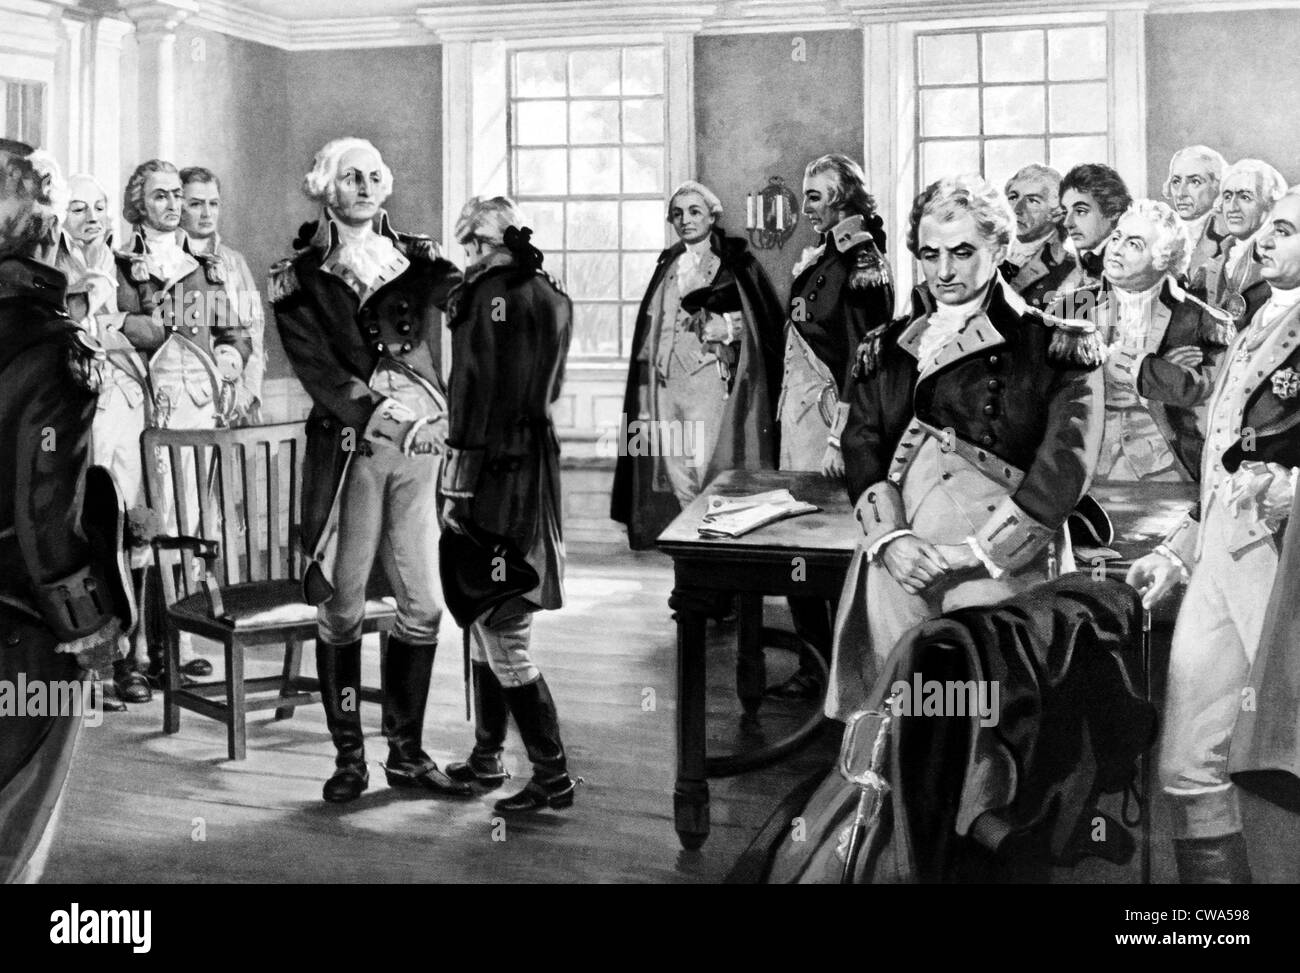 George Washington says farewell to his troops at Fraunces Tavern, New York, 1783. Painting by Hintermeister. Courtesy: CSU Stock Photo